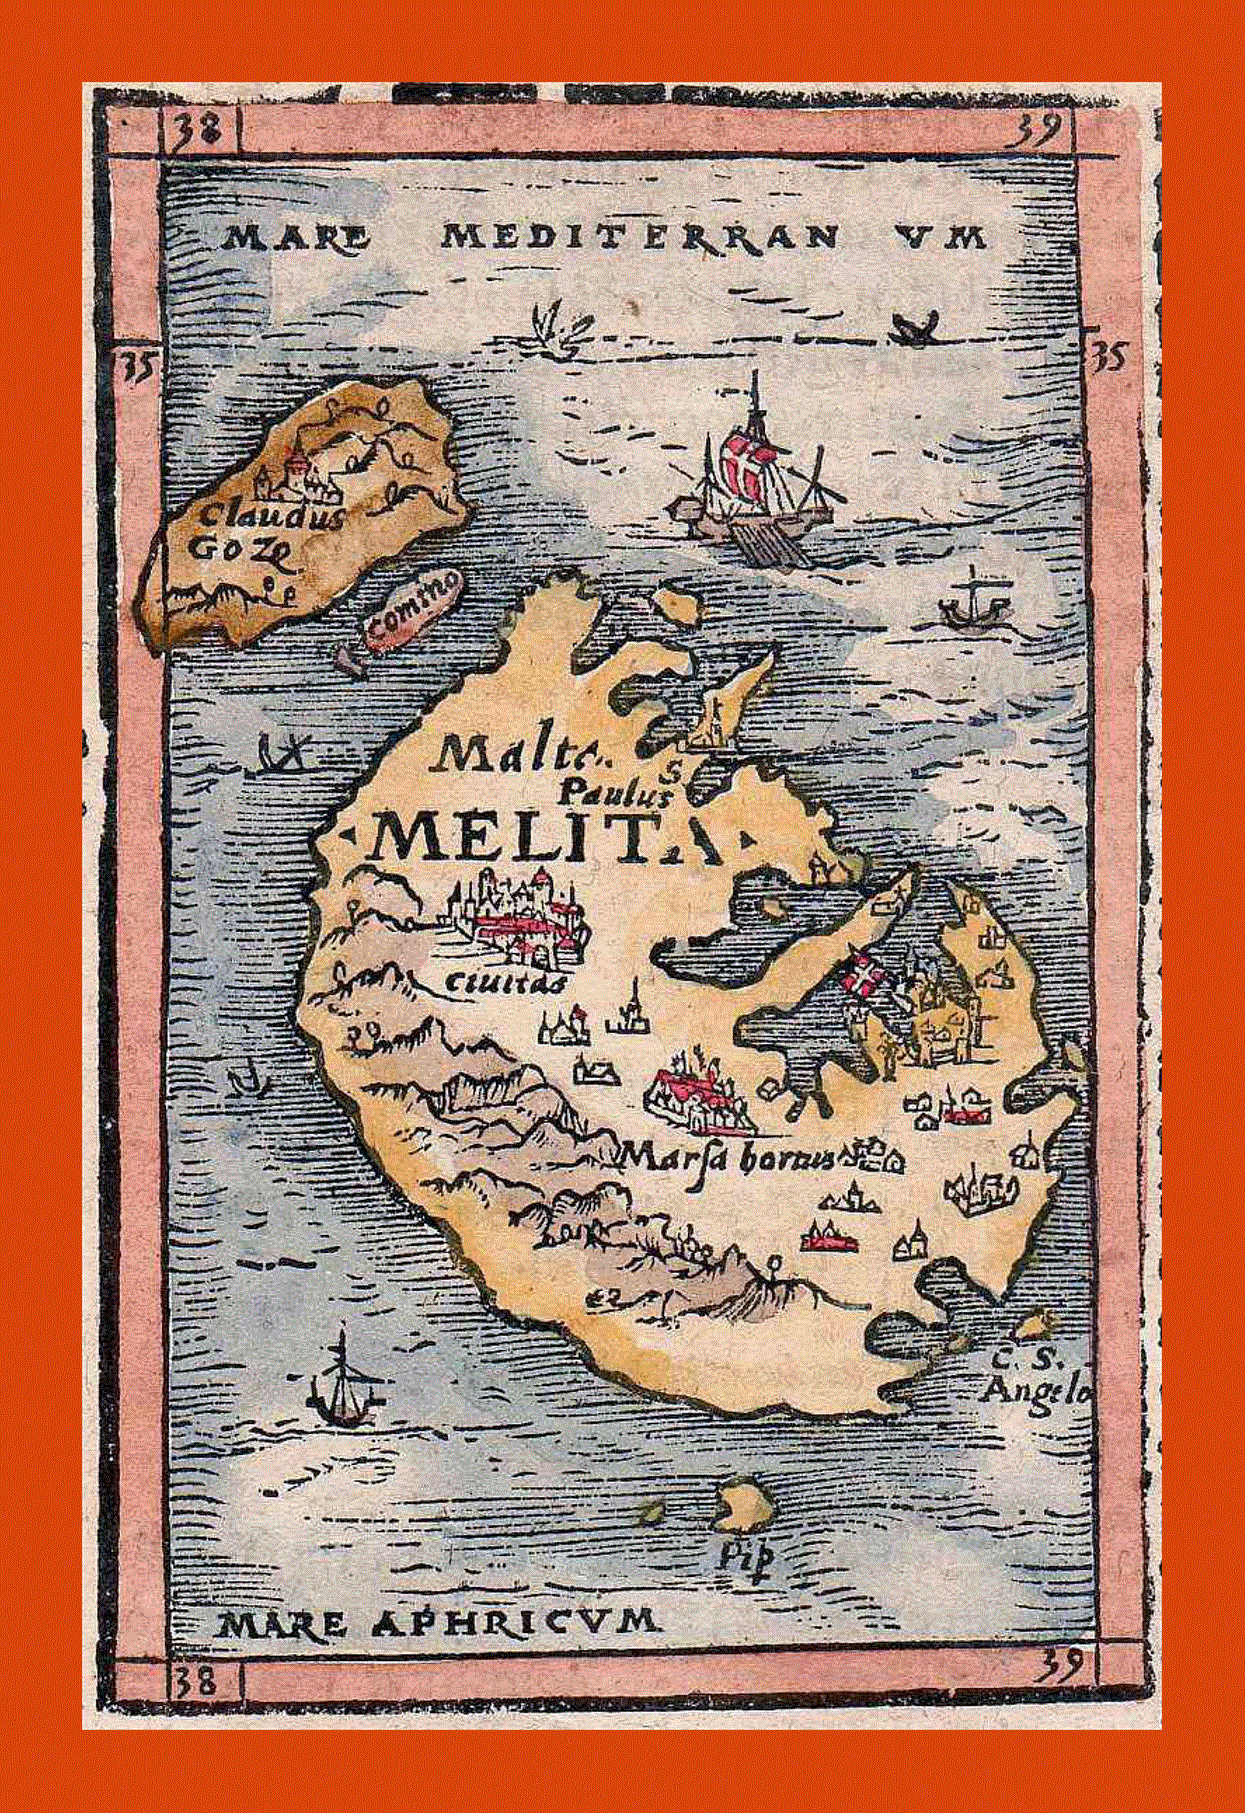 Old map of Malta and Gozo